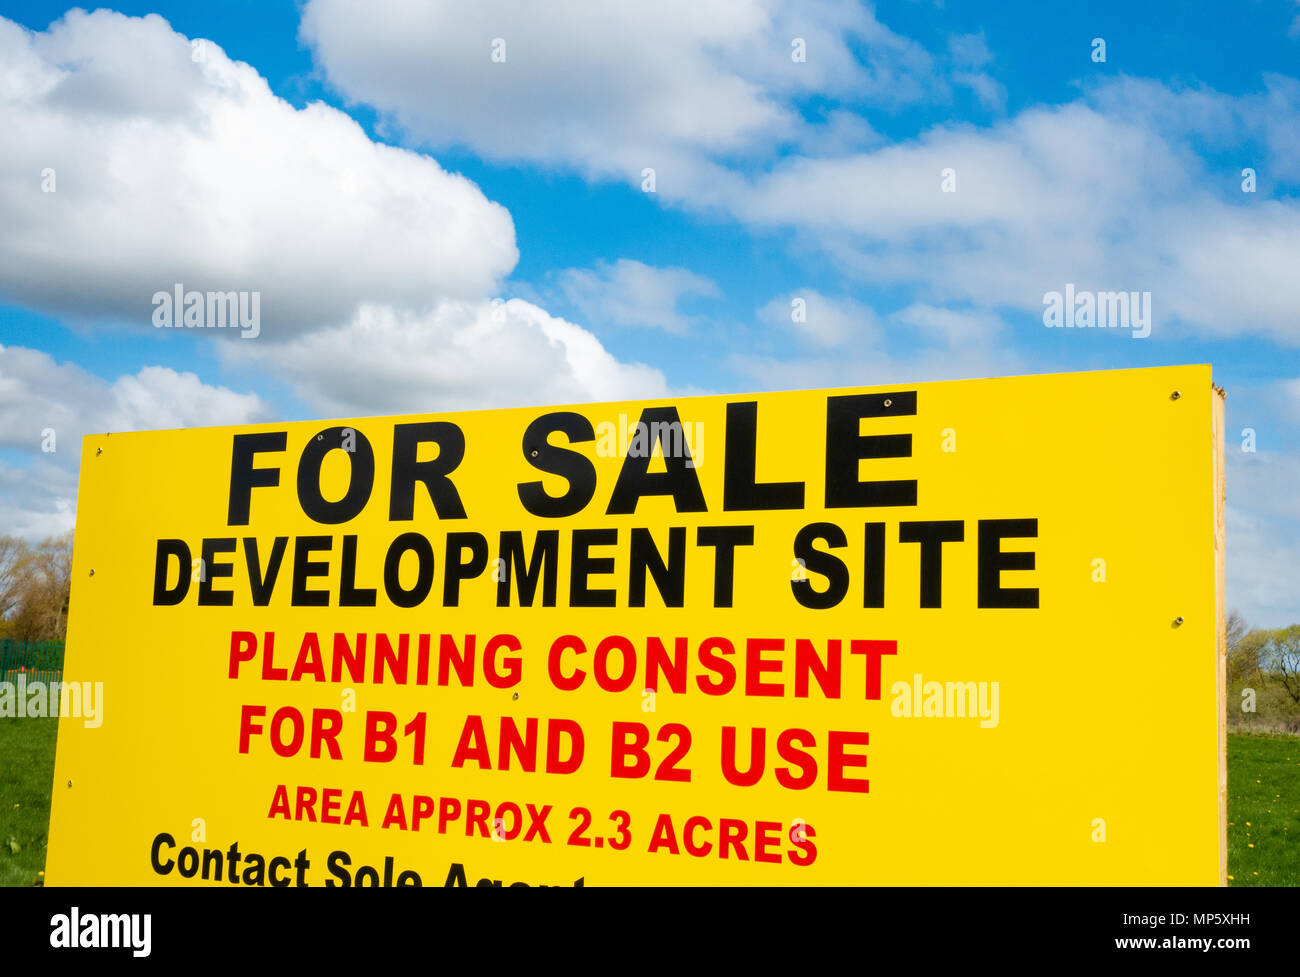 For sale sign: Development site, planning consent for B1 and B2 use. England. UK Stock Photo